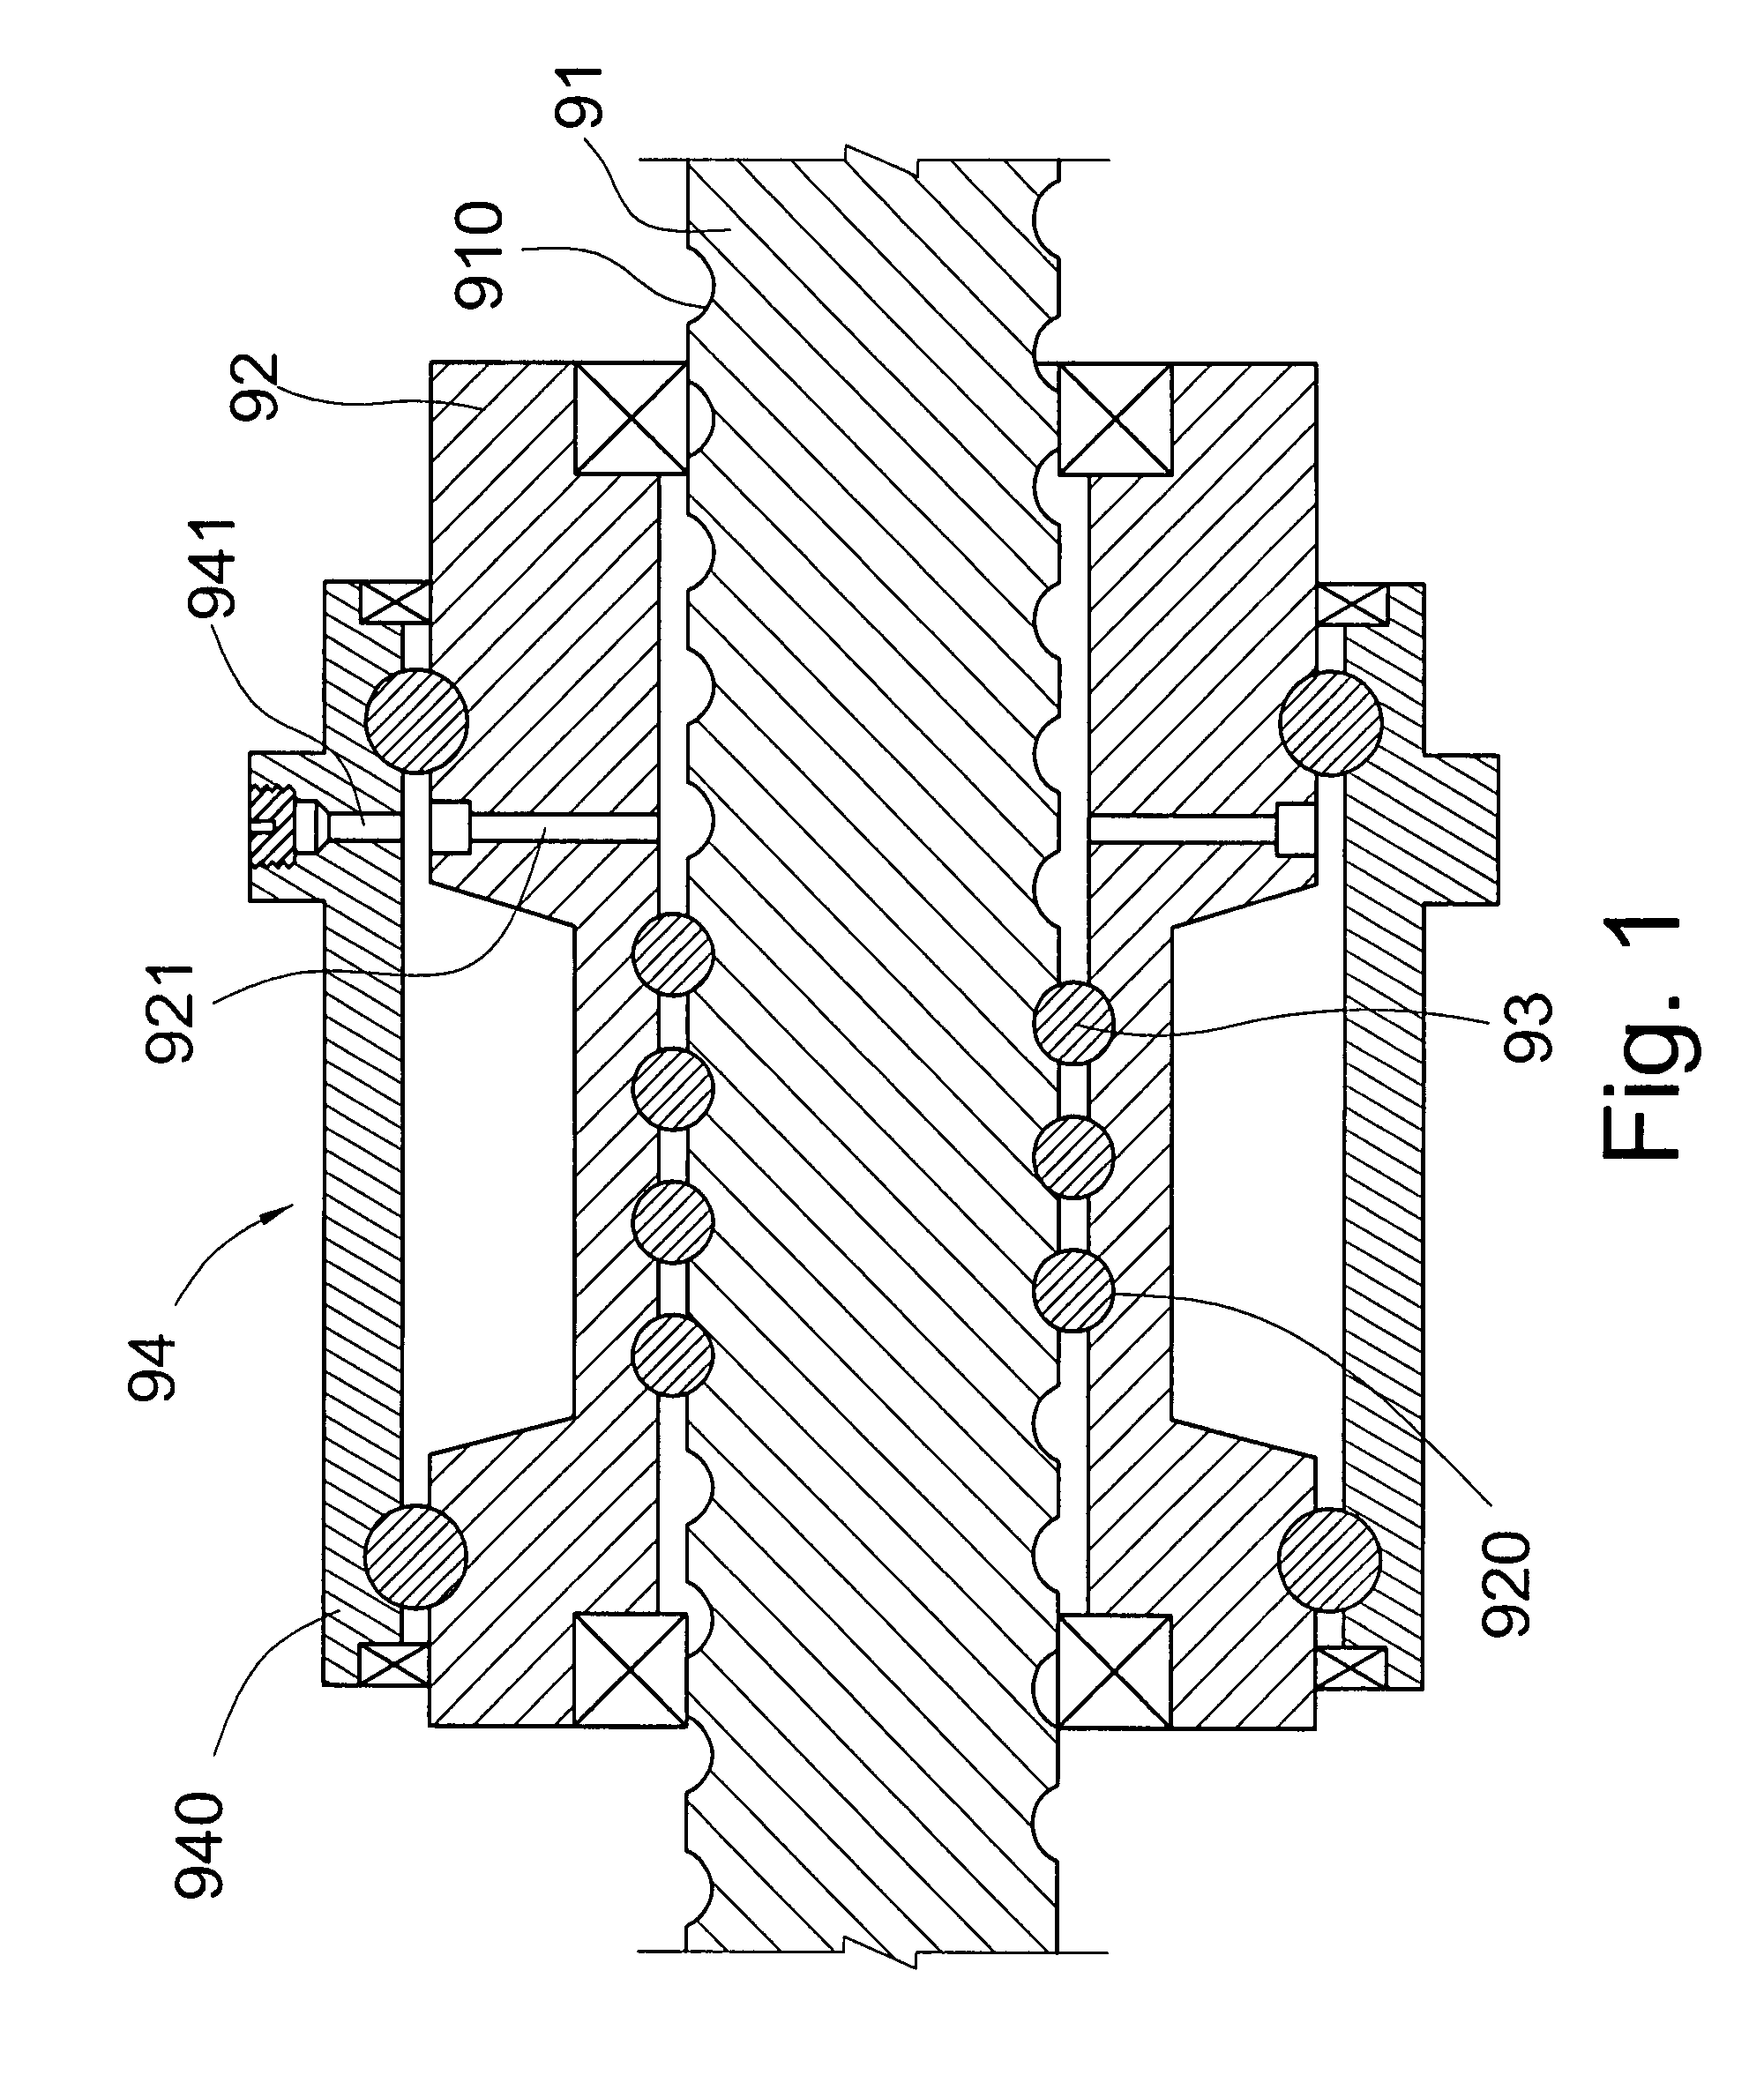 Rotating nut ball screw unit with lubricating arrangement